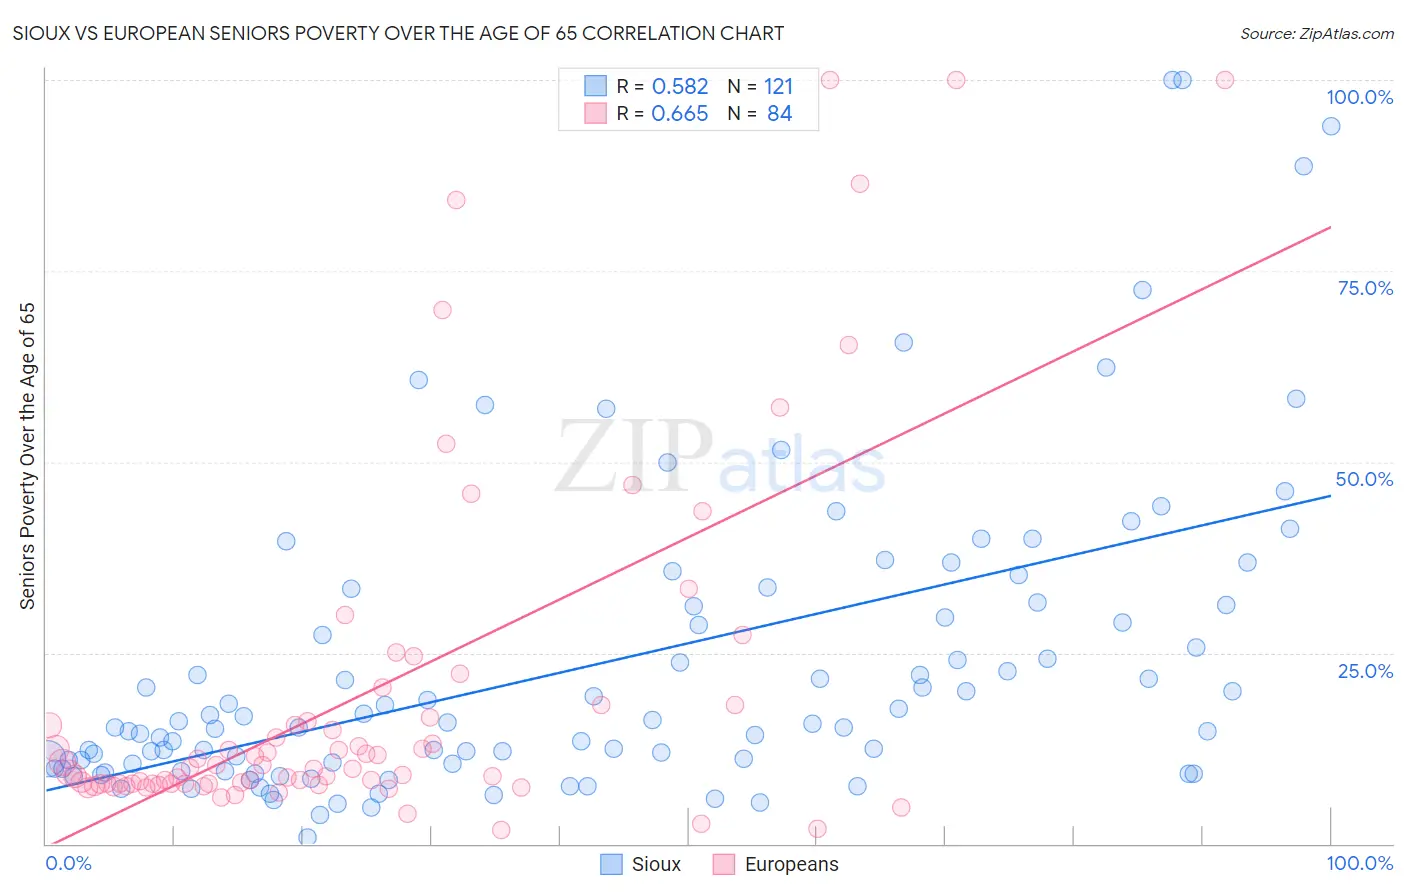 Sioux vs European Seniors Poverty Over the Age of 65